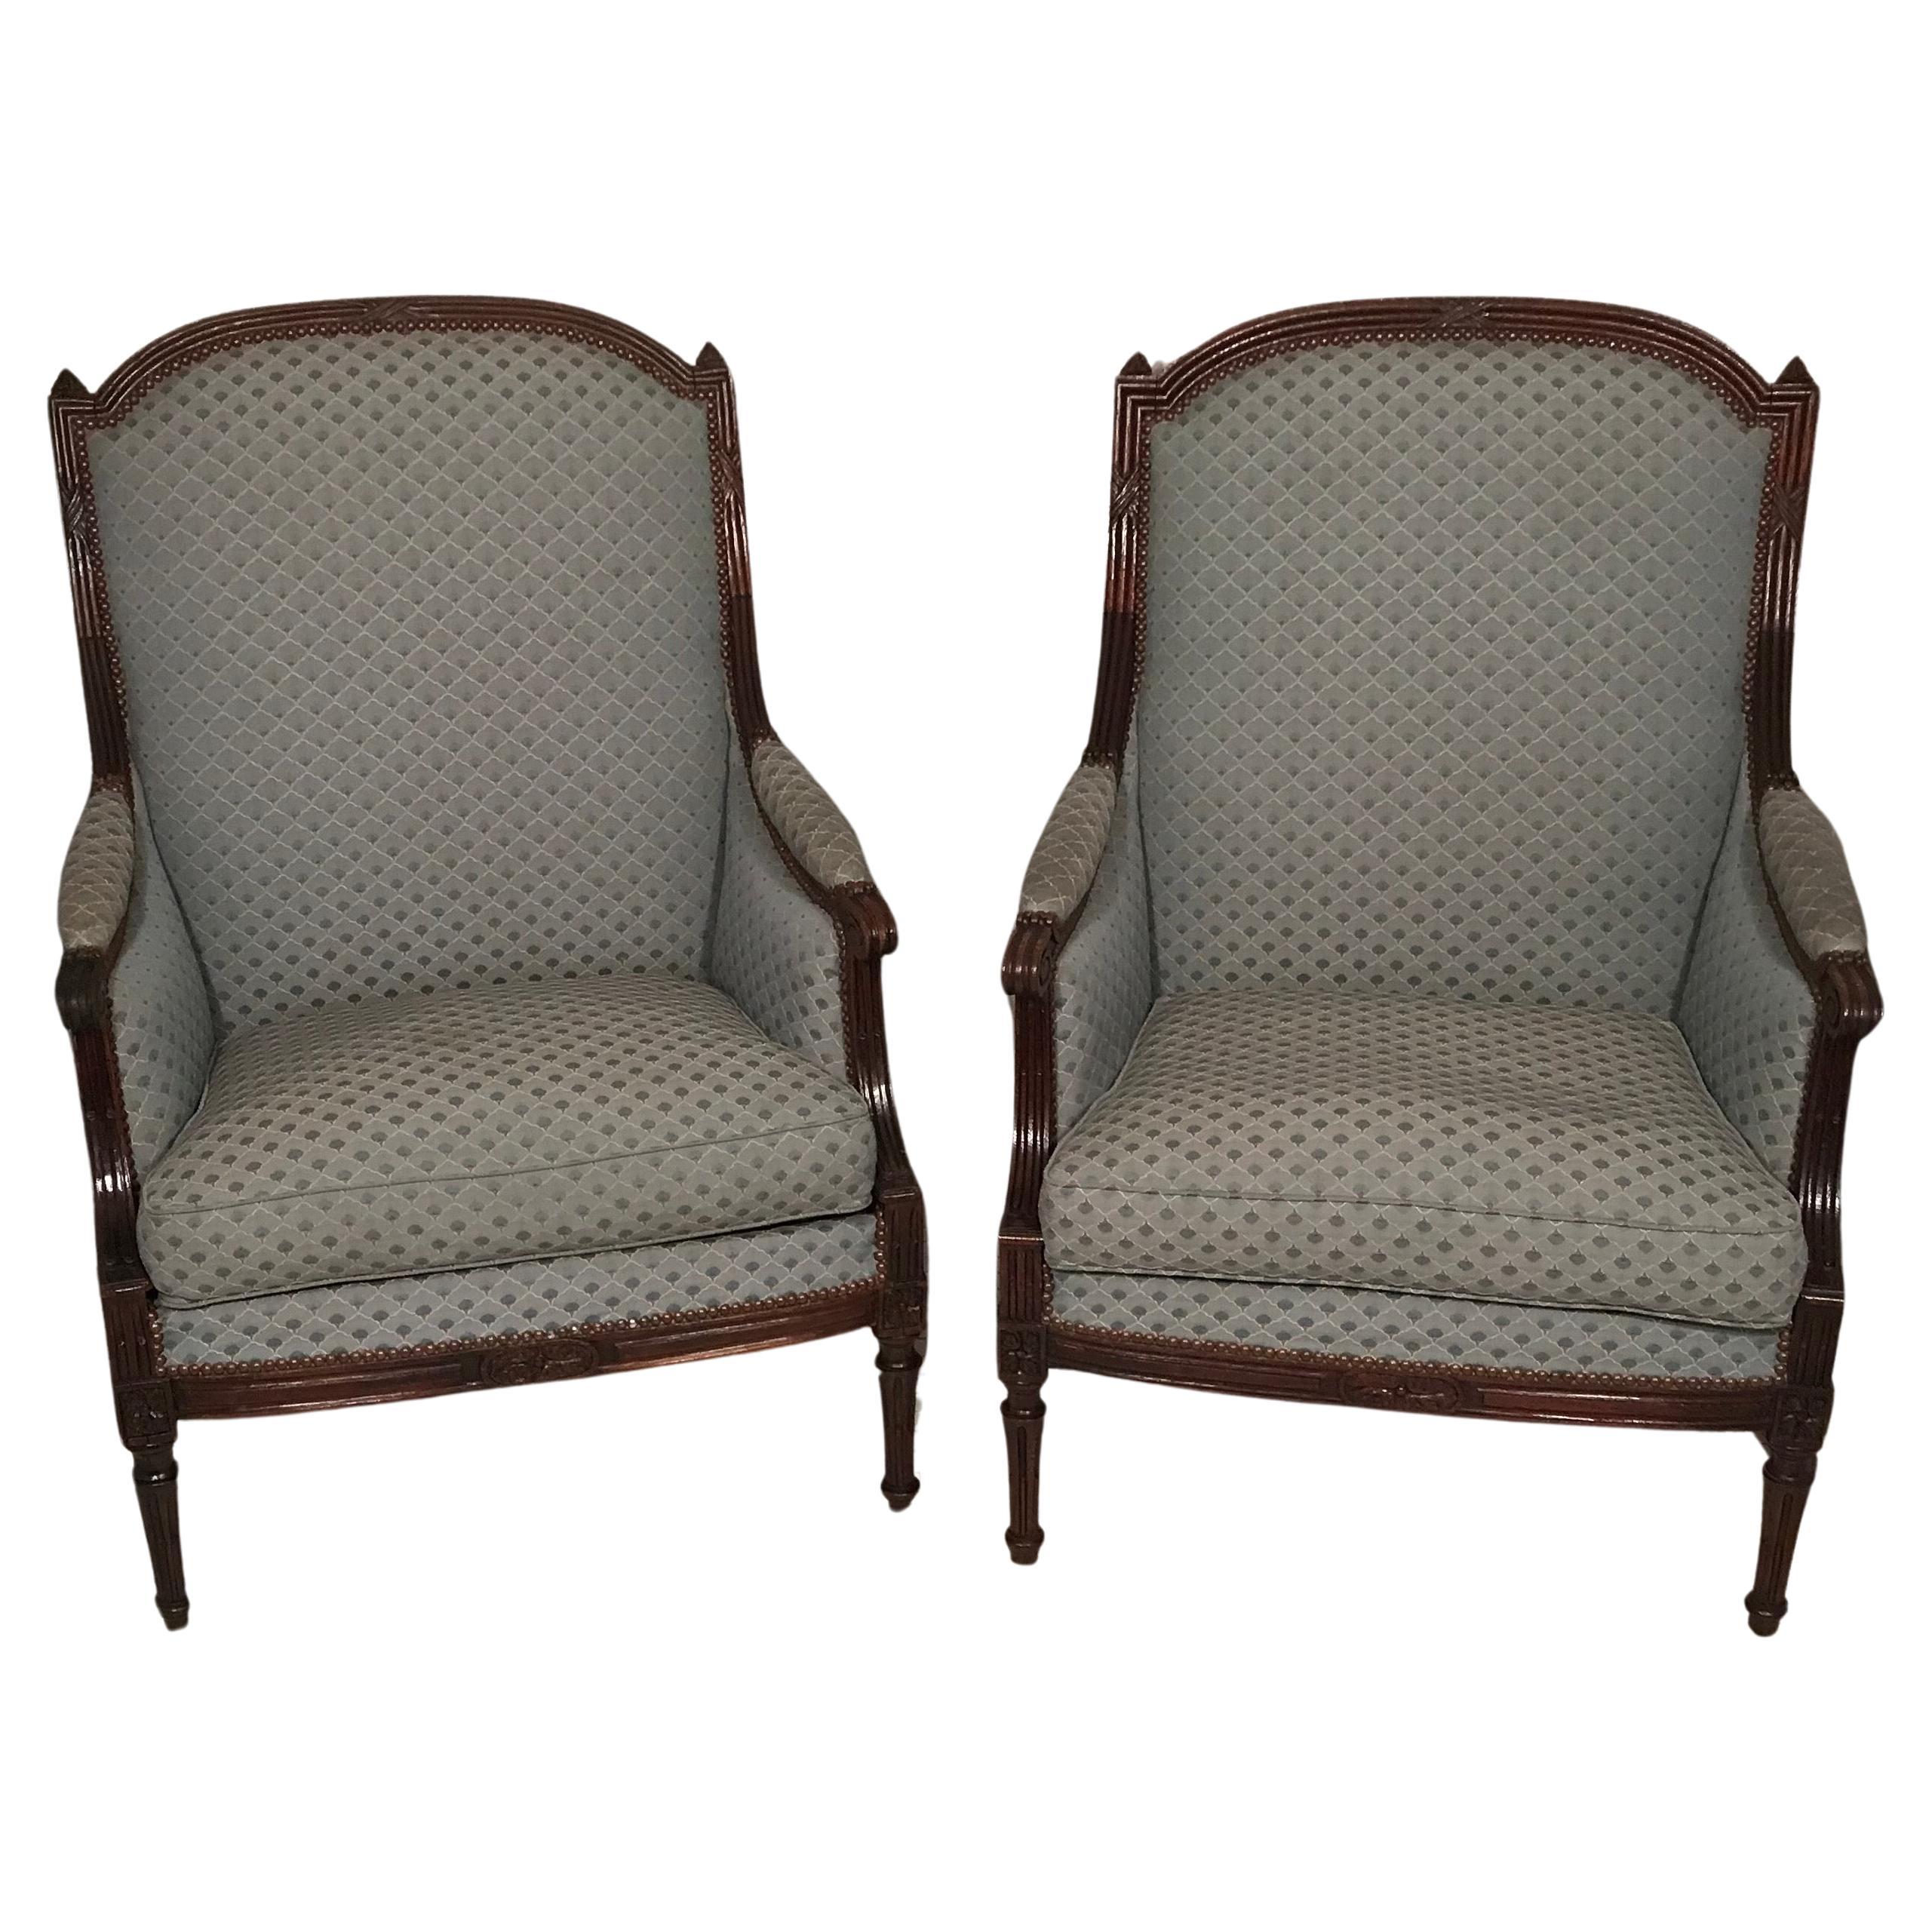 Pair of Louis XVI Style Bergère Armchairs, France 1860-80 For Sale